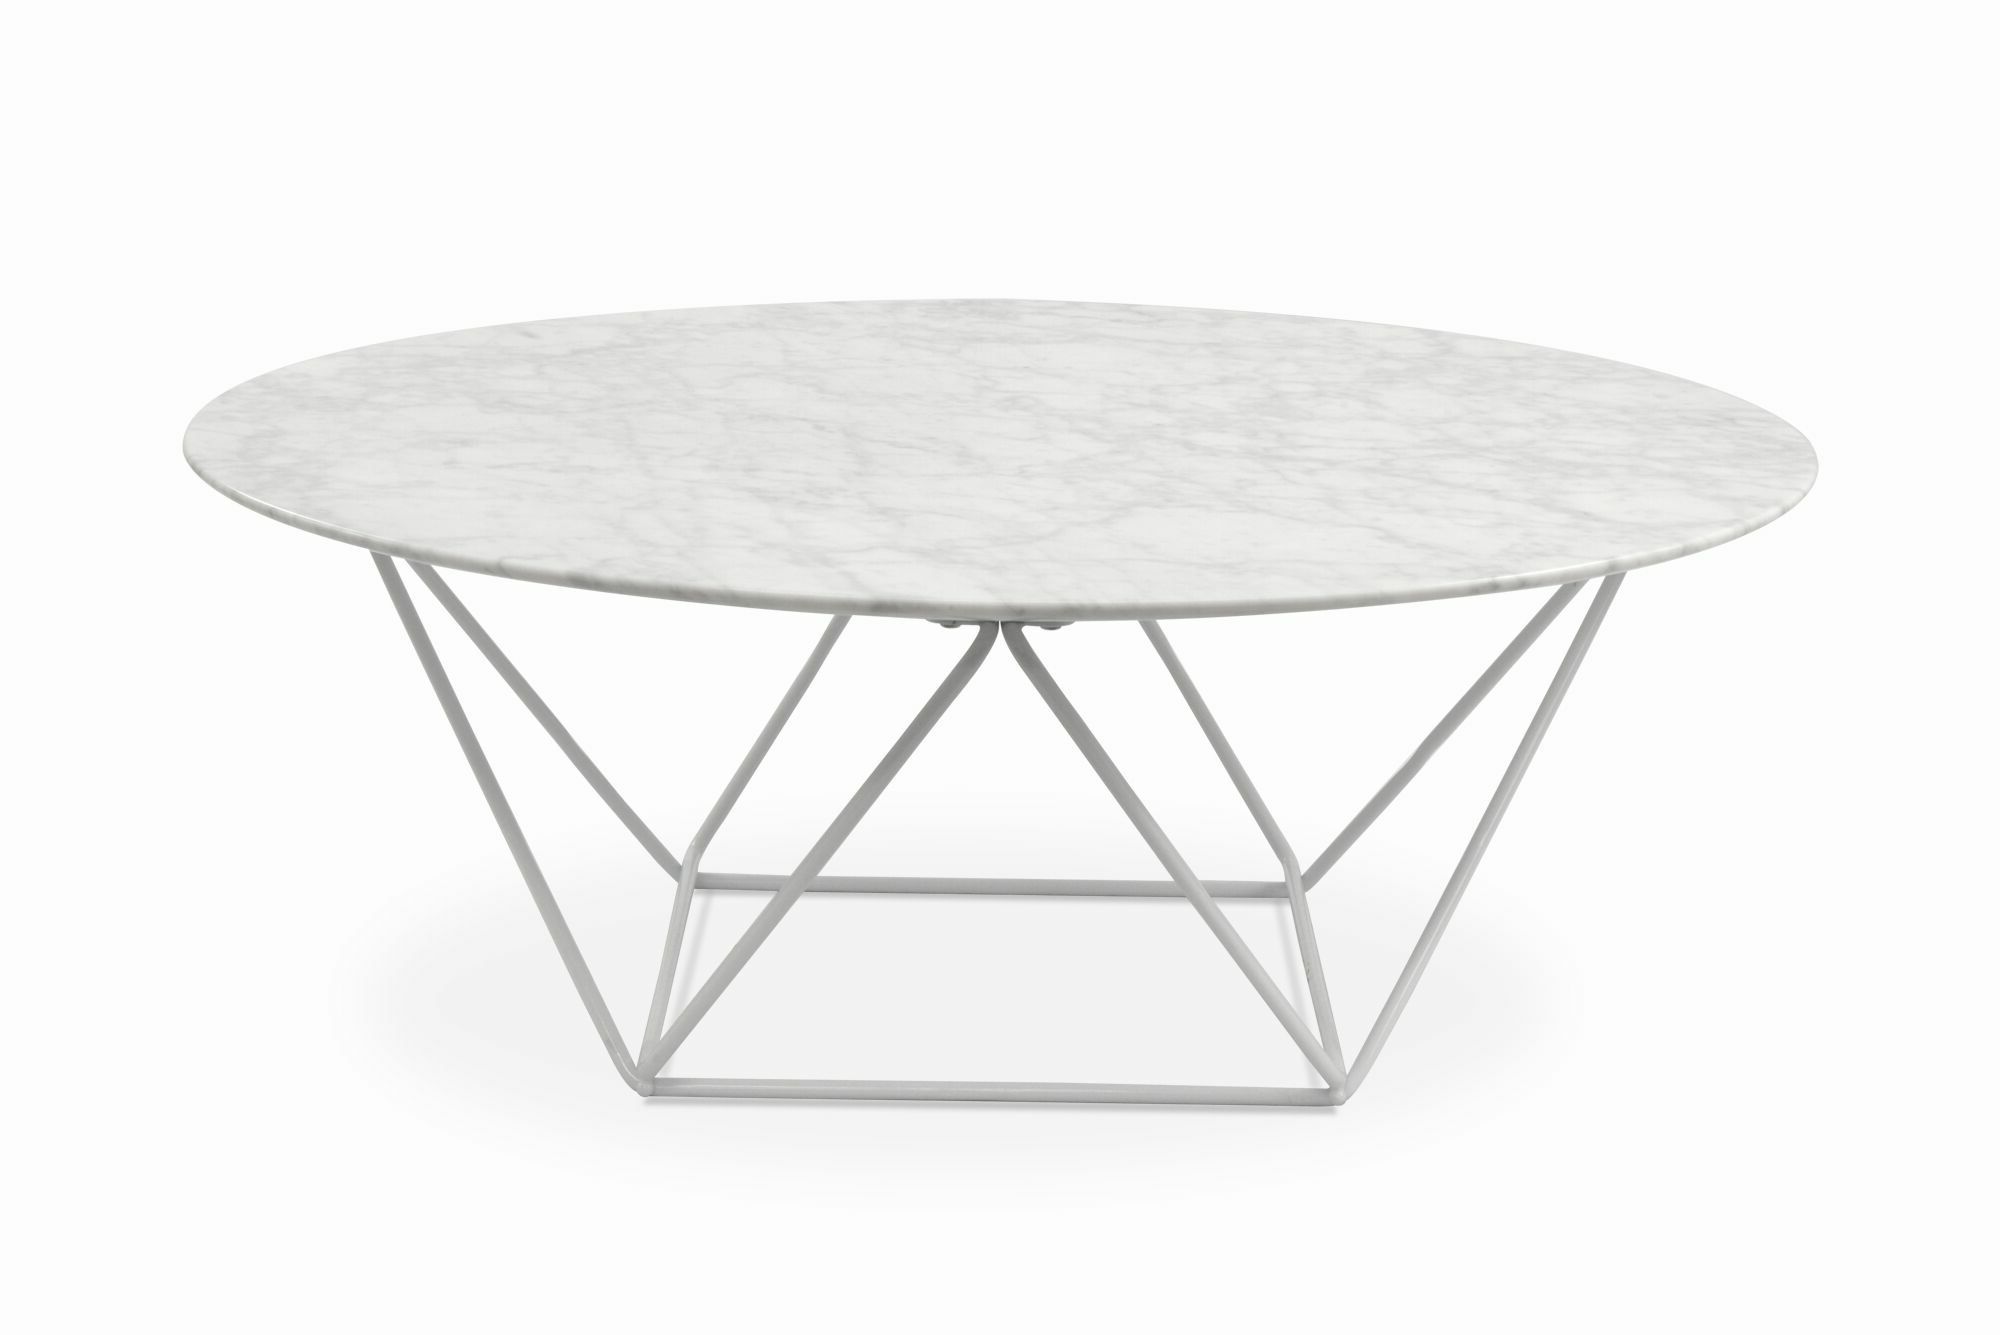 Robin 100cm Round Marble Coffee Table – White Base Within Well Known White Marble Coffee Tables (View 3 of 20)